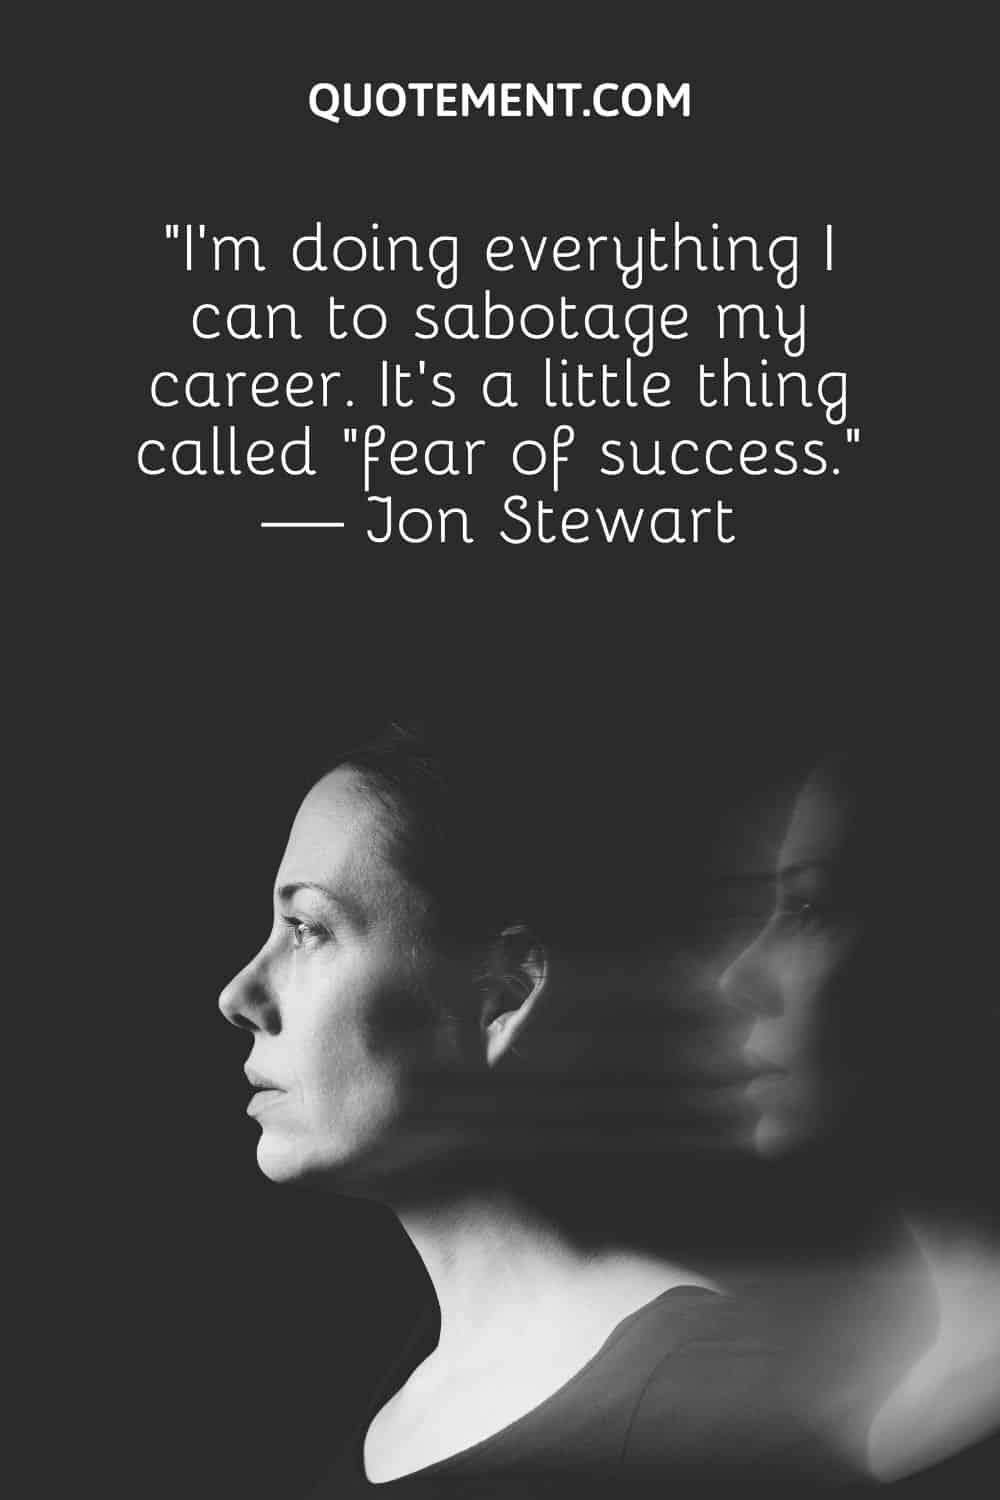 “I’m doing everything I can to sabotage my career. It’s a little thing called “fear of success.” — Jon Stewart